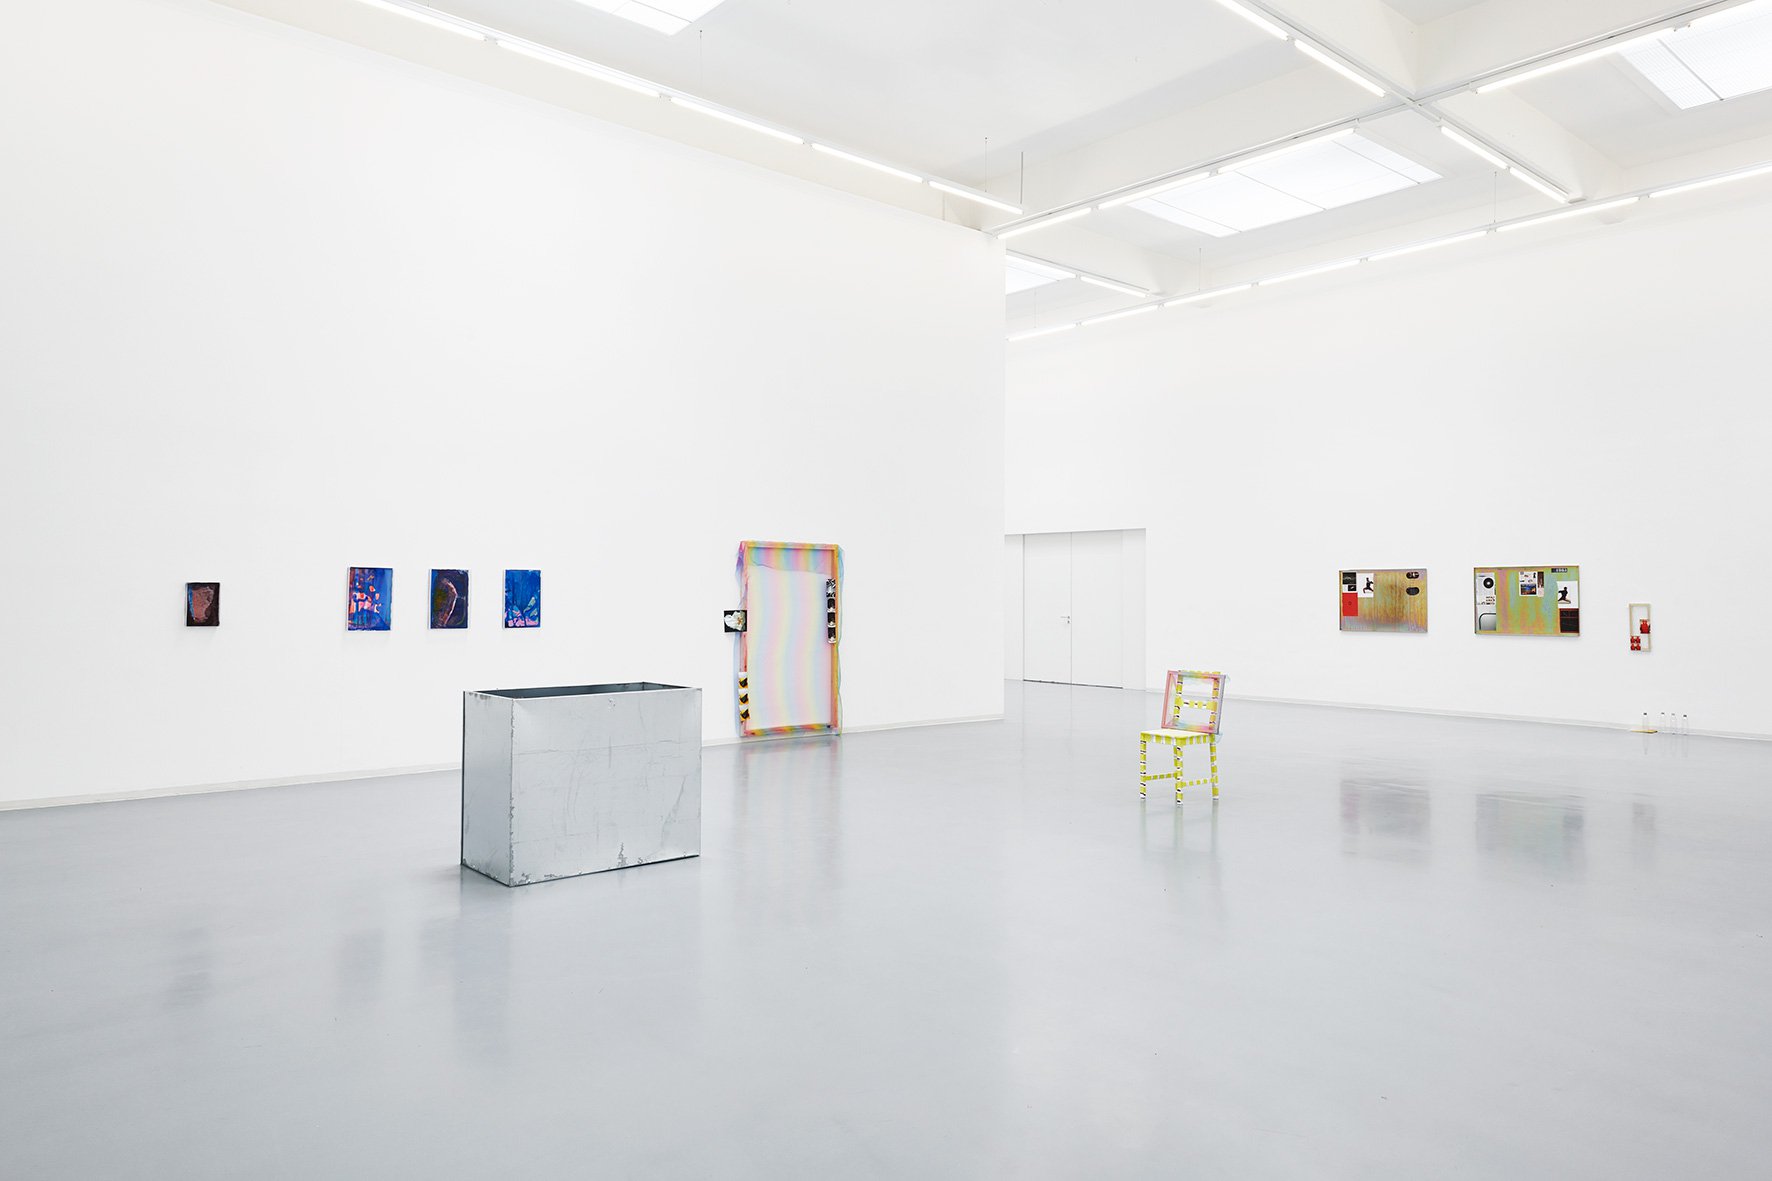 Hayley Tomkins: Stick crystals to paintings, Exhibition view, Bonner Kunstverein, 2018. Photo: Mareike Tocha